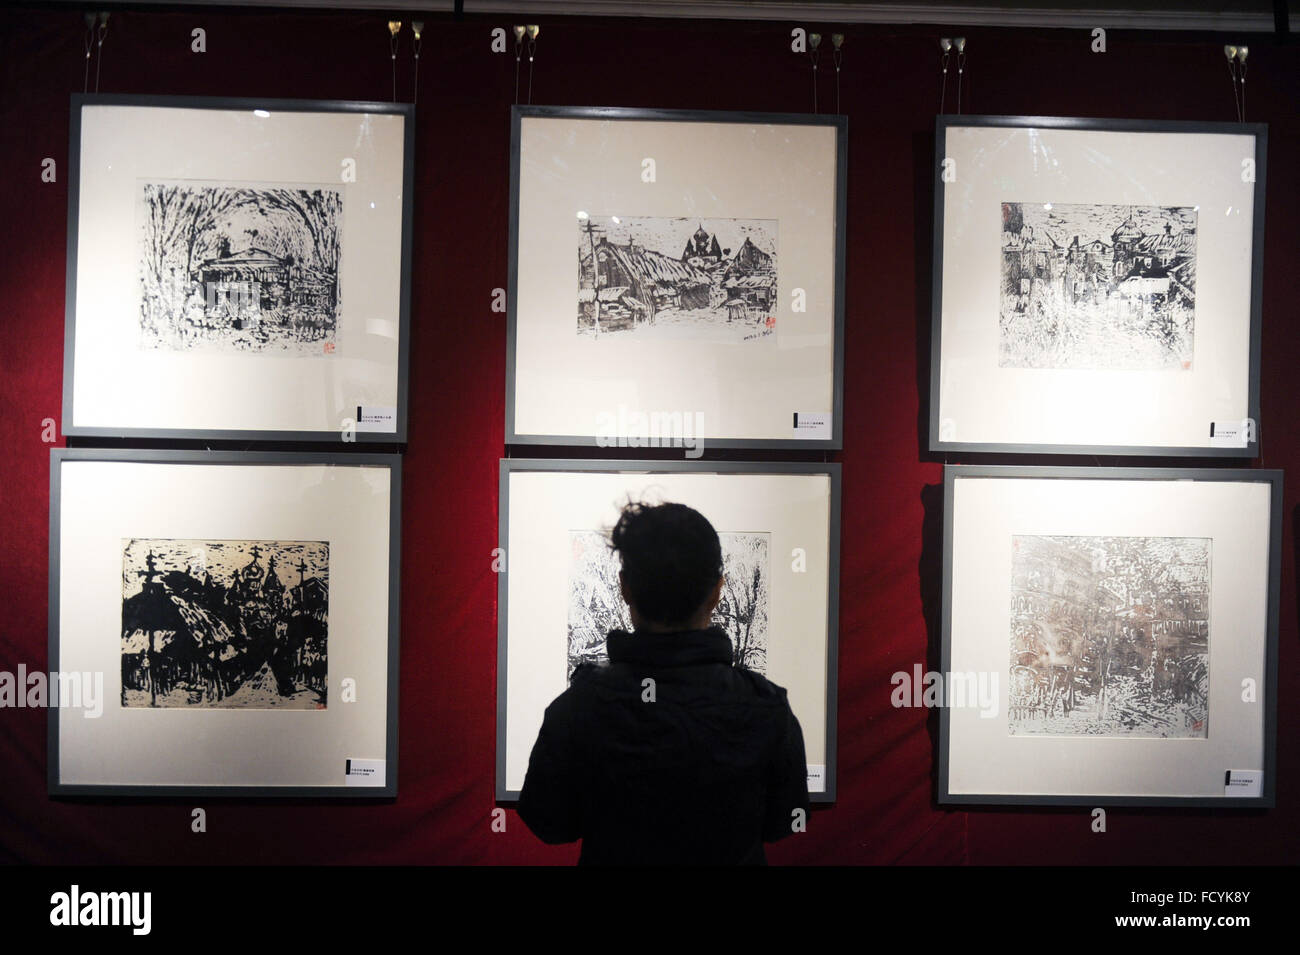 Harbin, China's Heilongjiang Province. 26th Jan, 2016. A visitor views an exhibition of ice engraving painting in Harbin, capital of northeast China's Heilongjiang Province, Jan. 26, 2016. The pictures on display were printed from engraved ice slabs, according to artist Zhu Xiaodong. He said each ice slab was able to print out some 20 pages yielding variant results as the ice melted down. © Wang Song/Xinhua/Alamy Live News Stock Photo